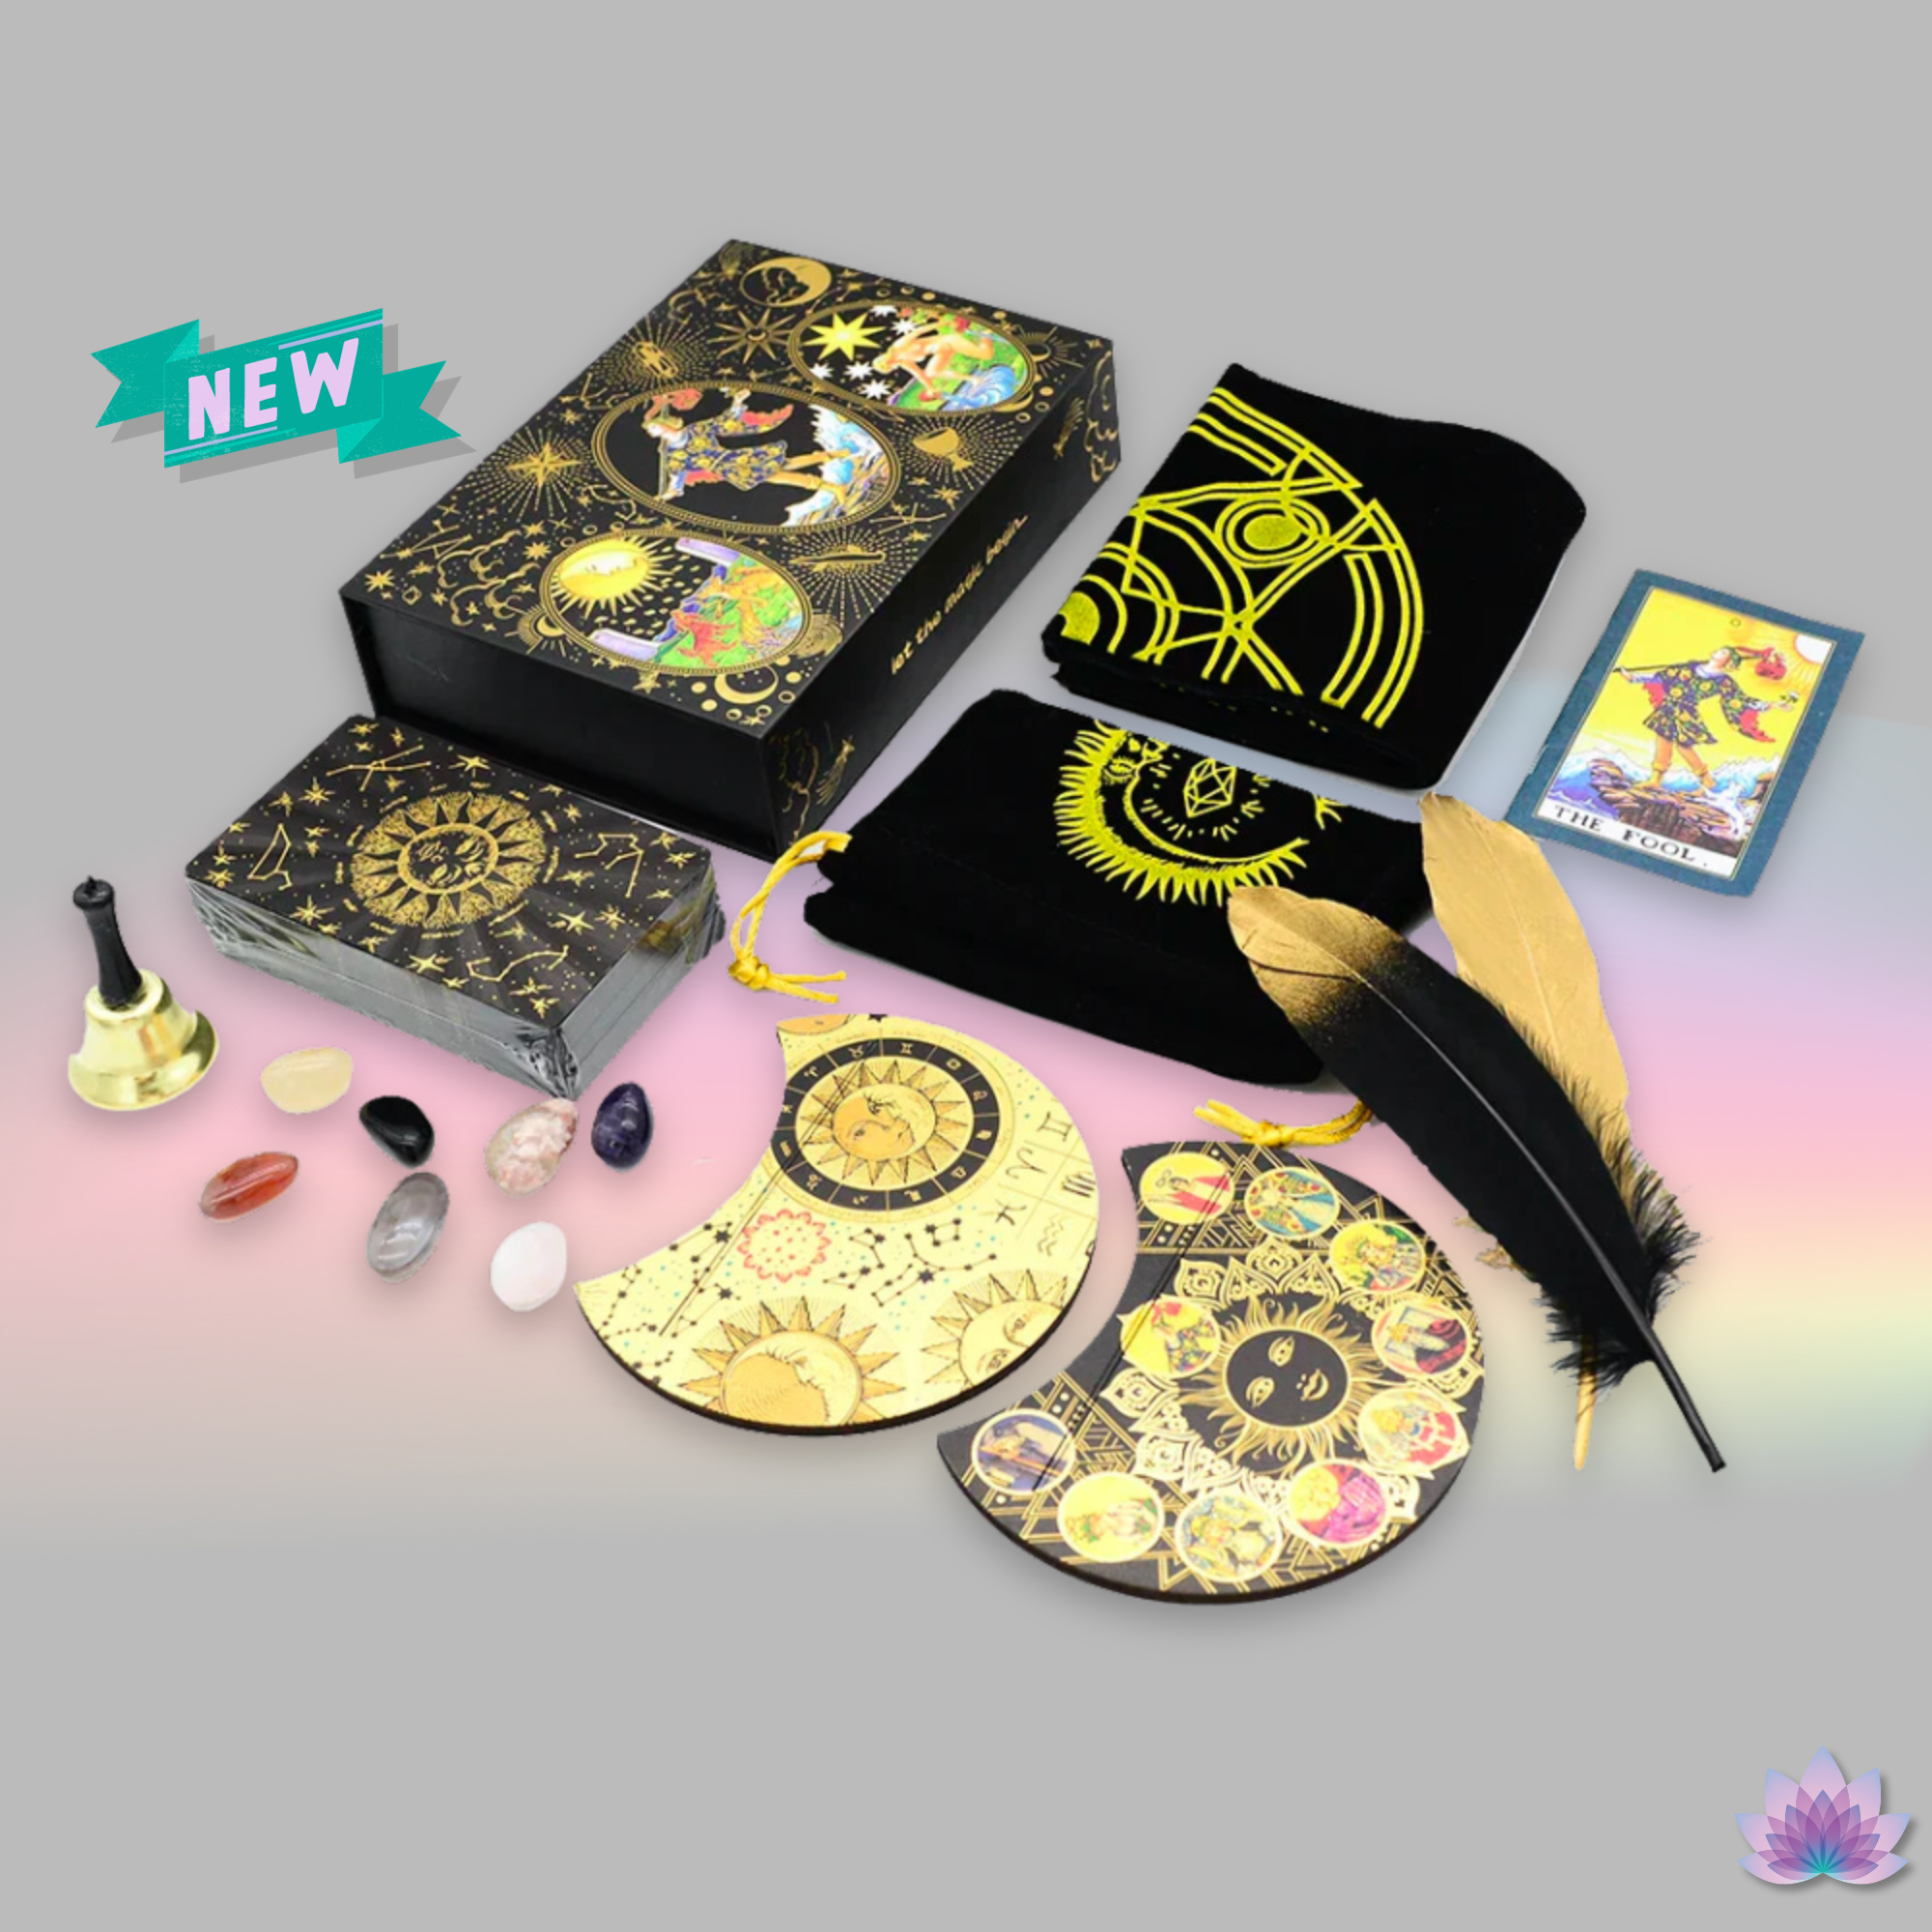 Gold Foil Tarot Deck • Deluxe Box + Witchy Gift Set & Beginner's Guidebook • Premium Golden Wear-Resistant Cards + Wooden Stand, Feathers, Crystals, Bell, Tablecloth, Bag • Apollo Tarot Shop